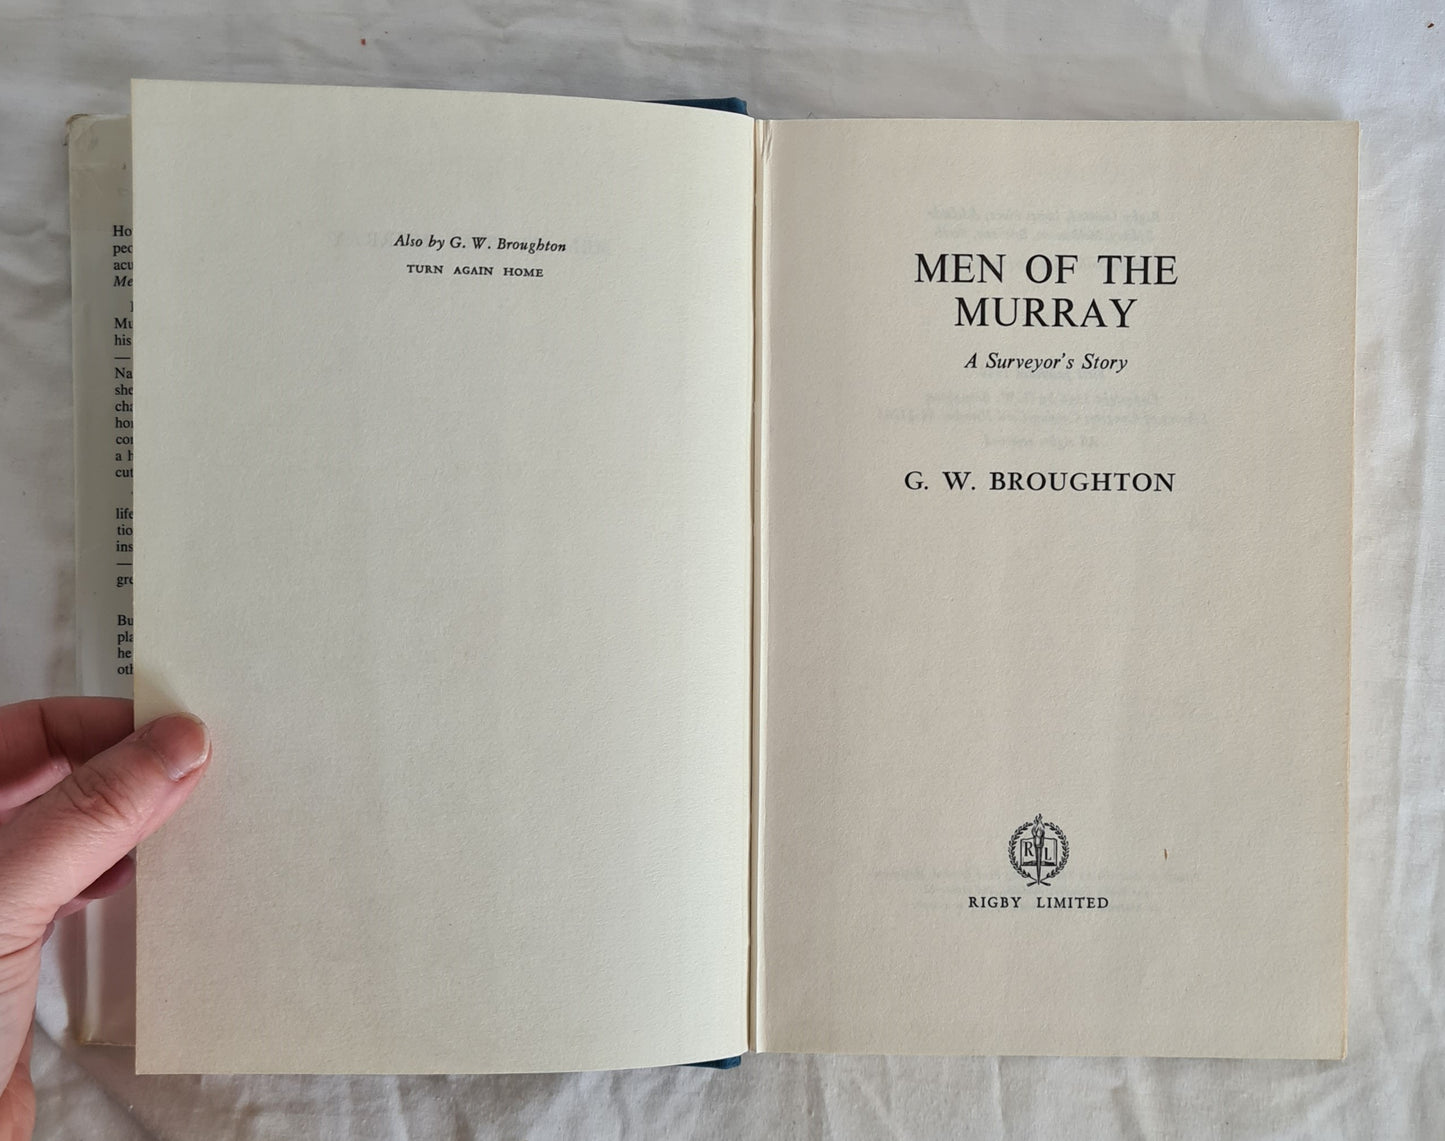 Men of the Murray by G. W. Broughton